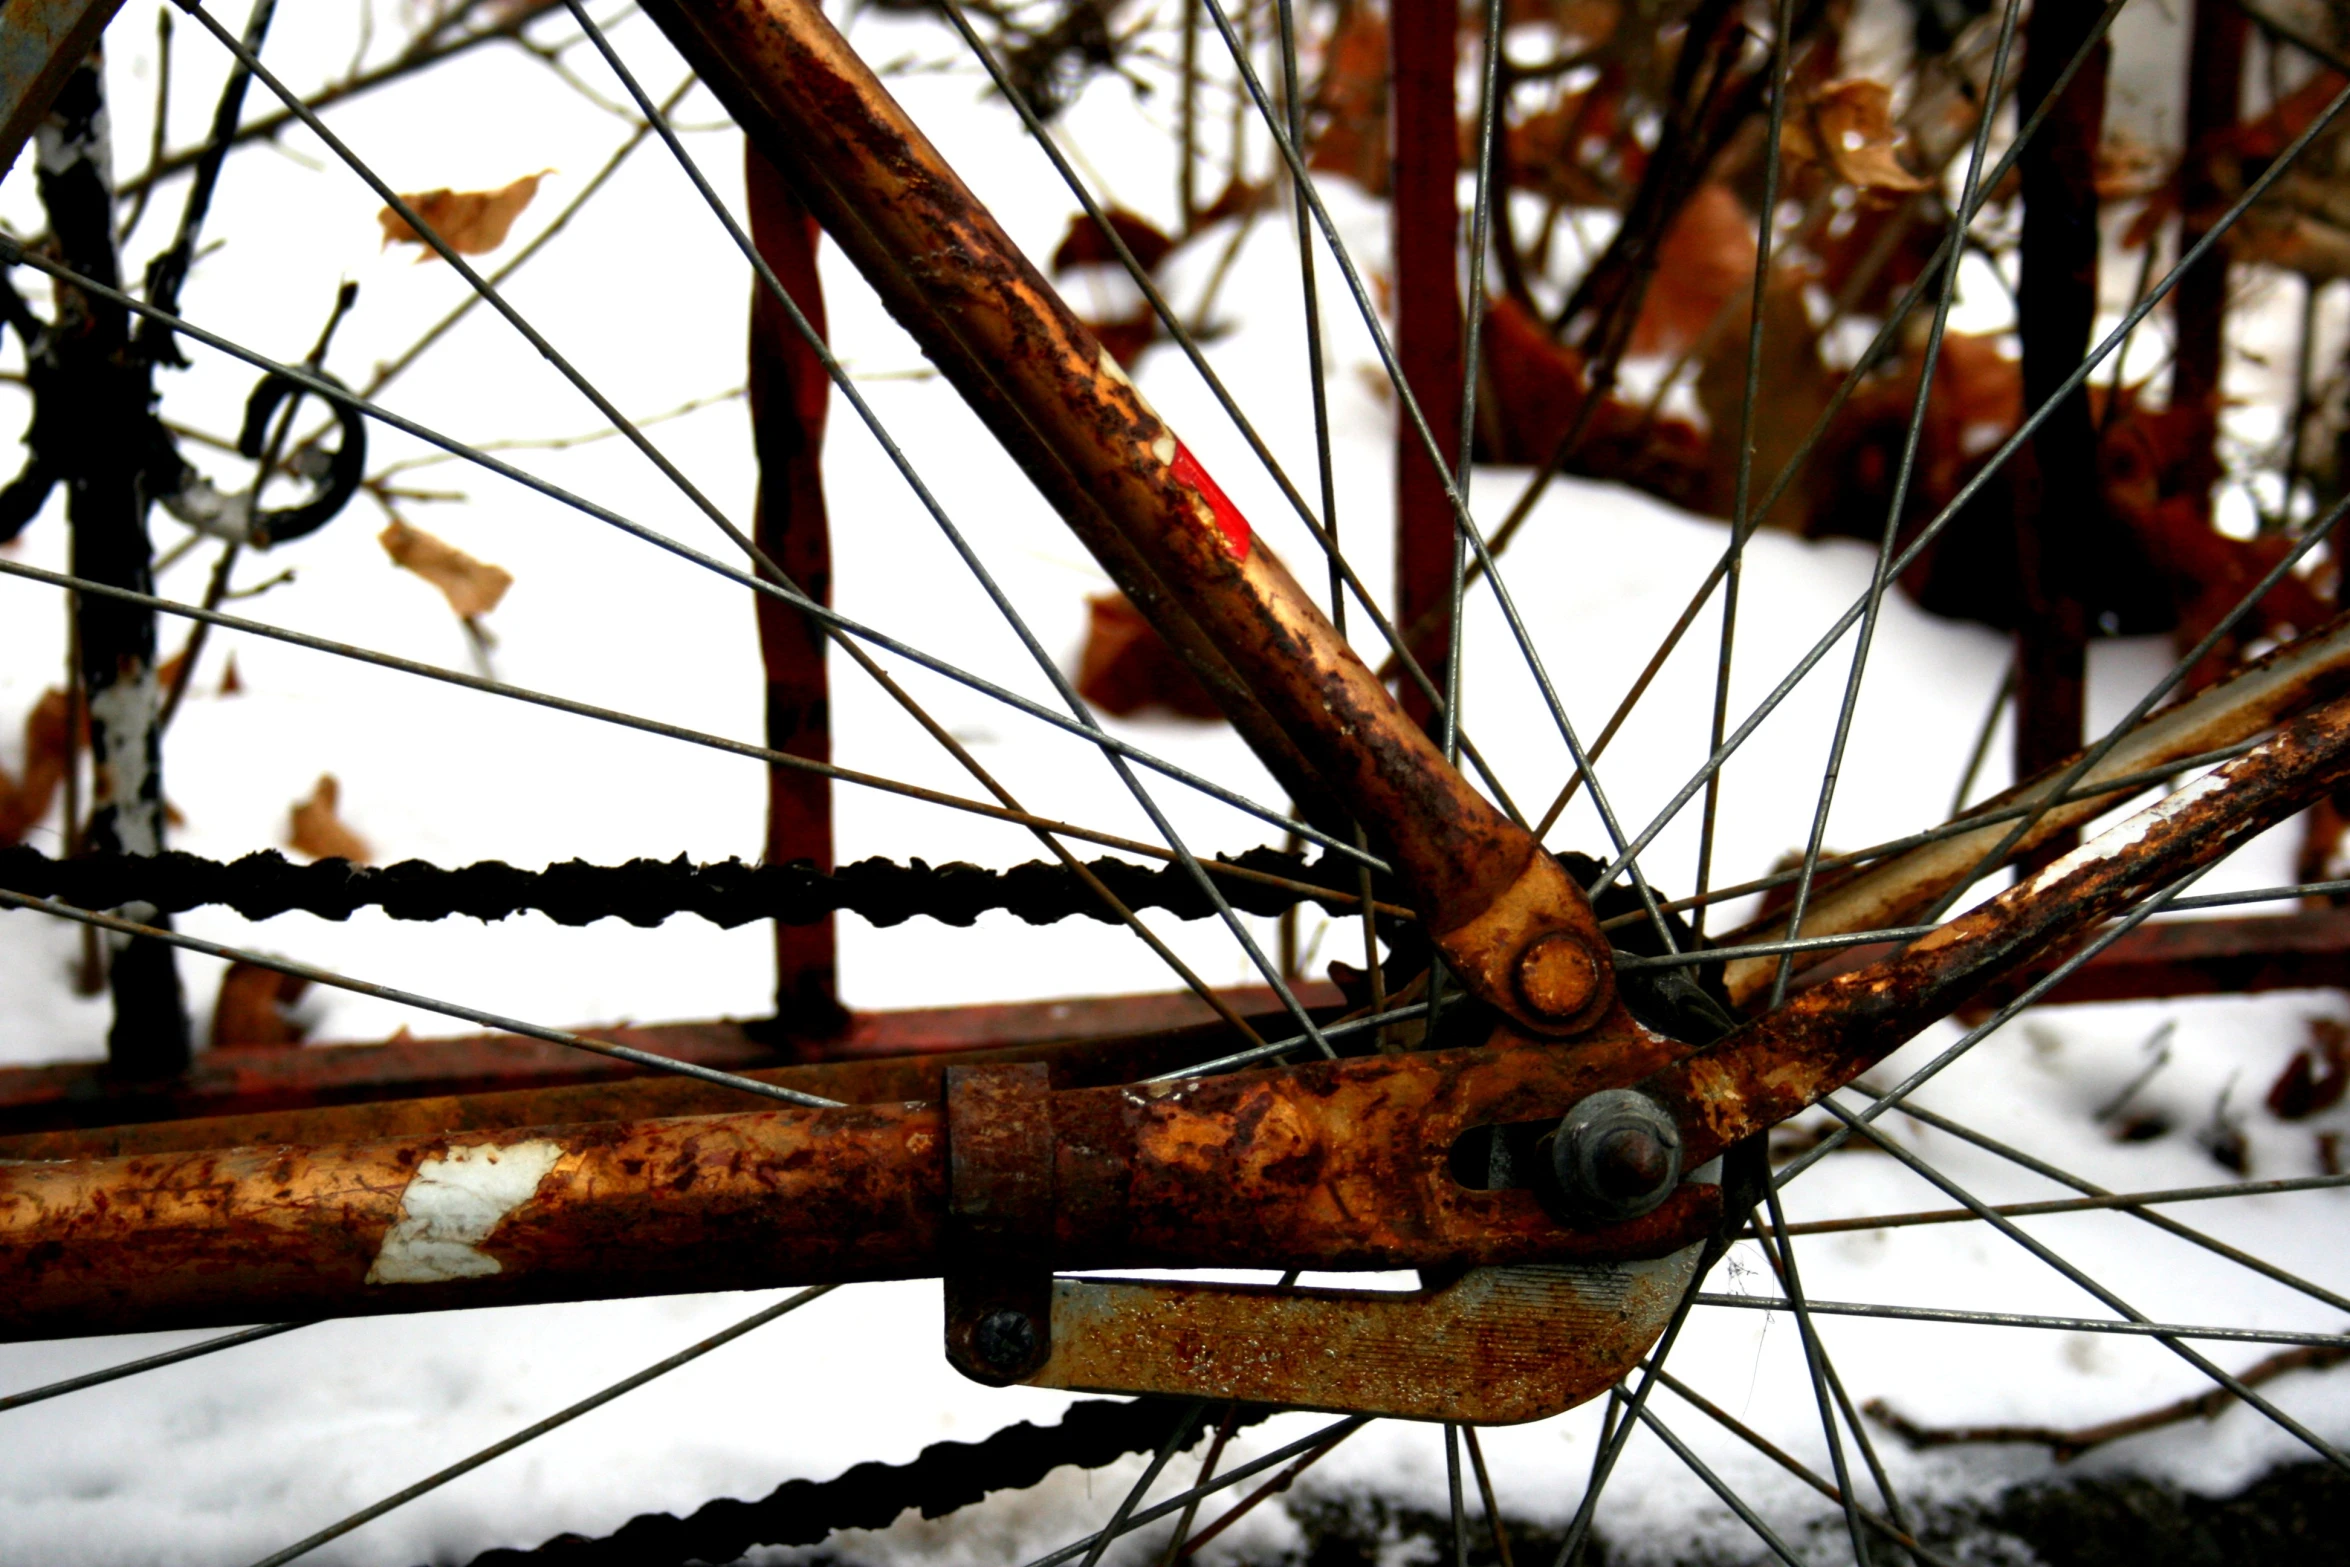 the spokes and sides of a rusted bicycle on snow covered ground